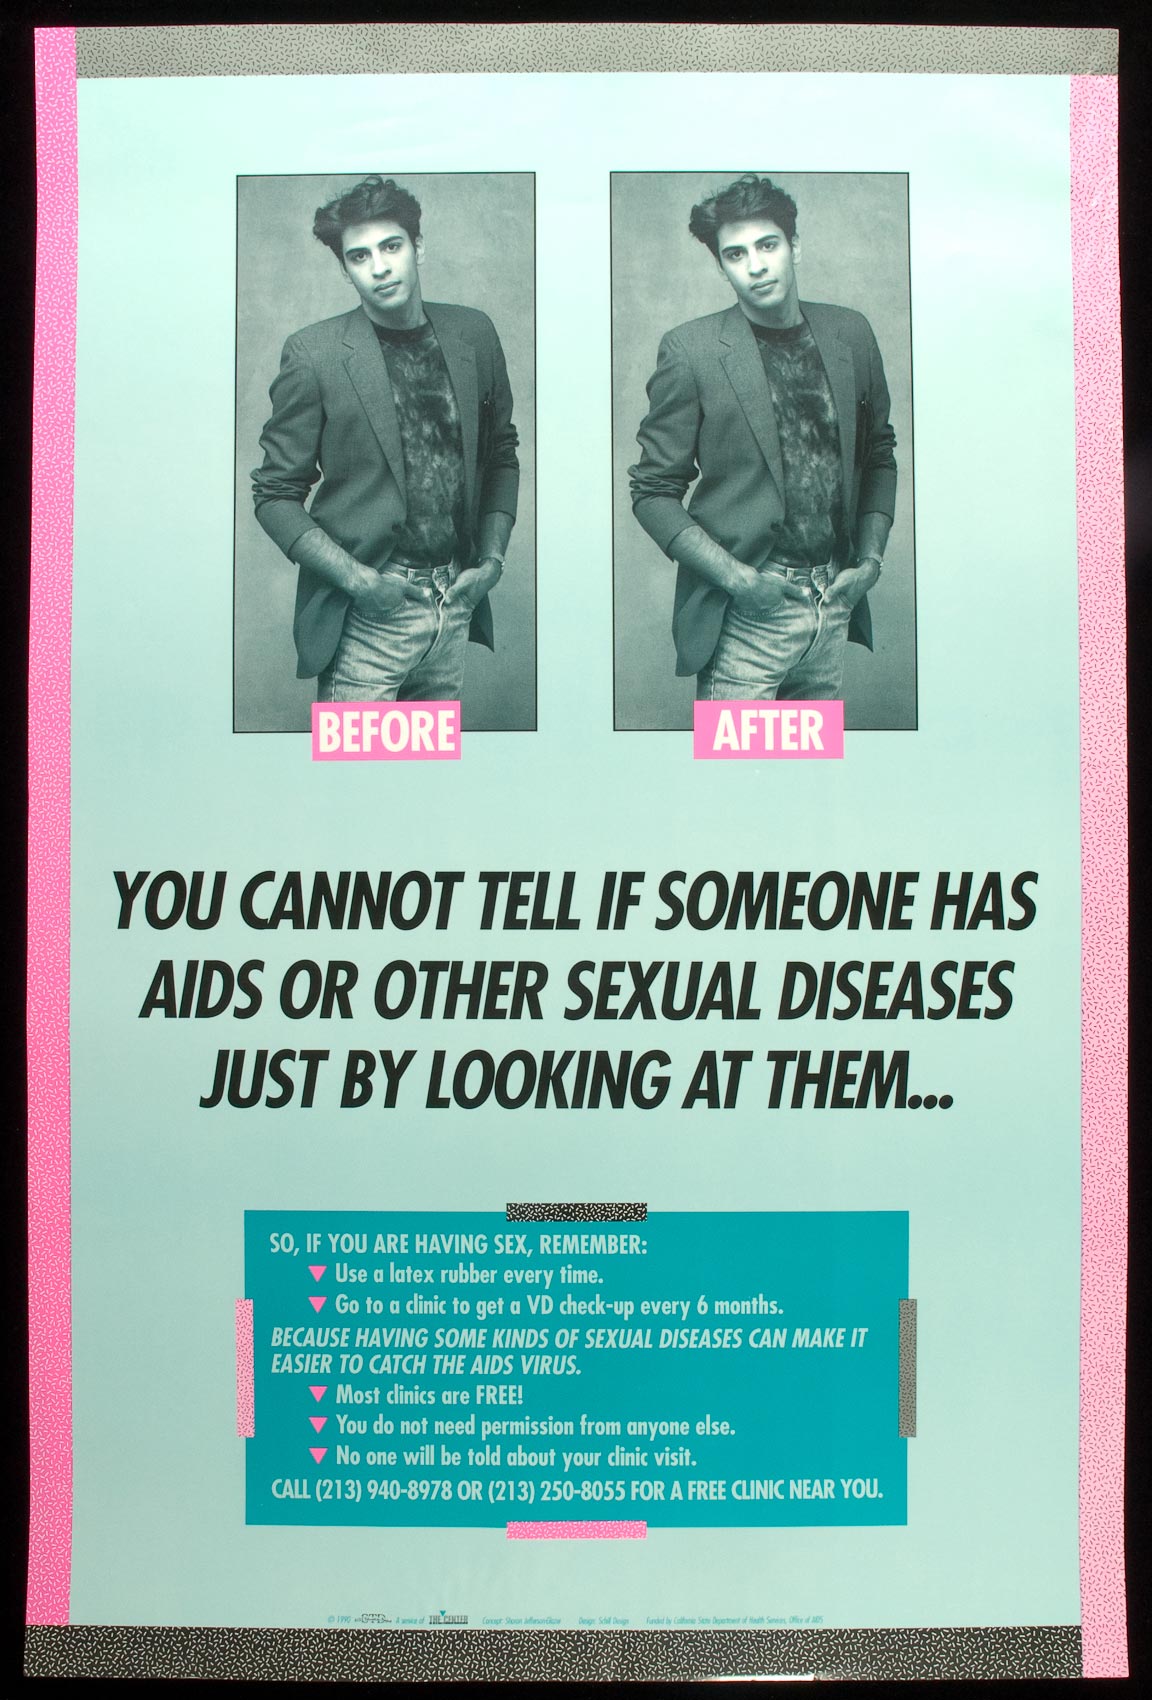 You cannot tell if someone has AIDS . . .